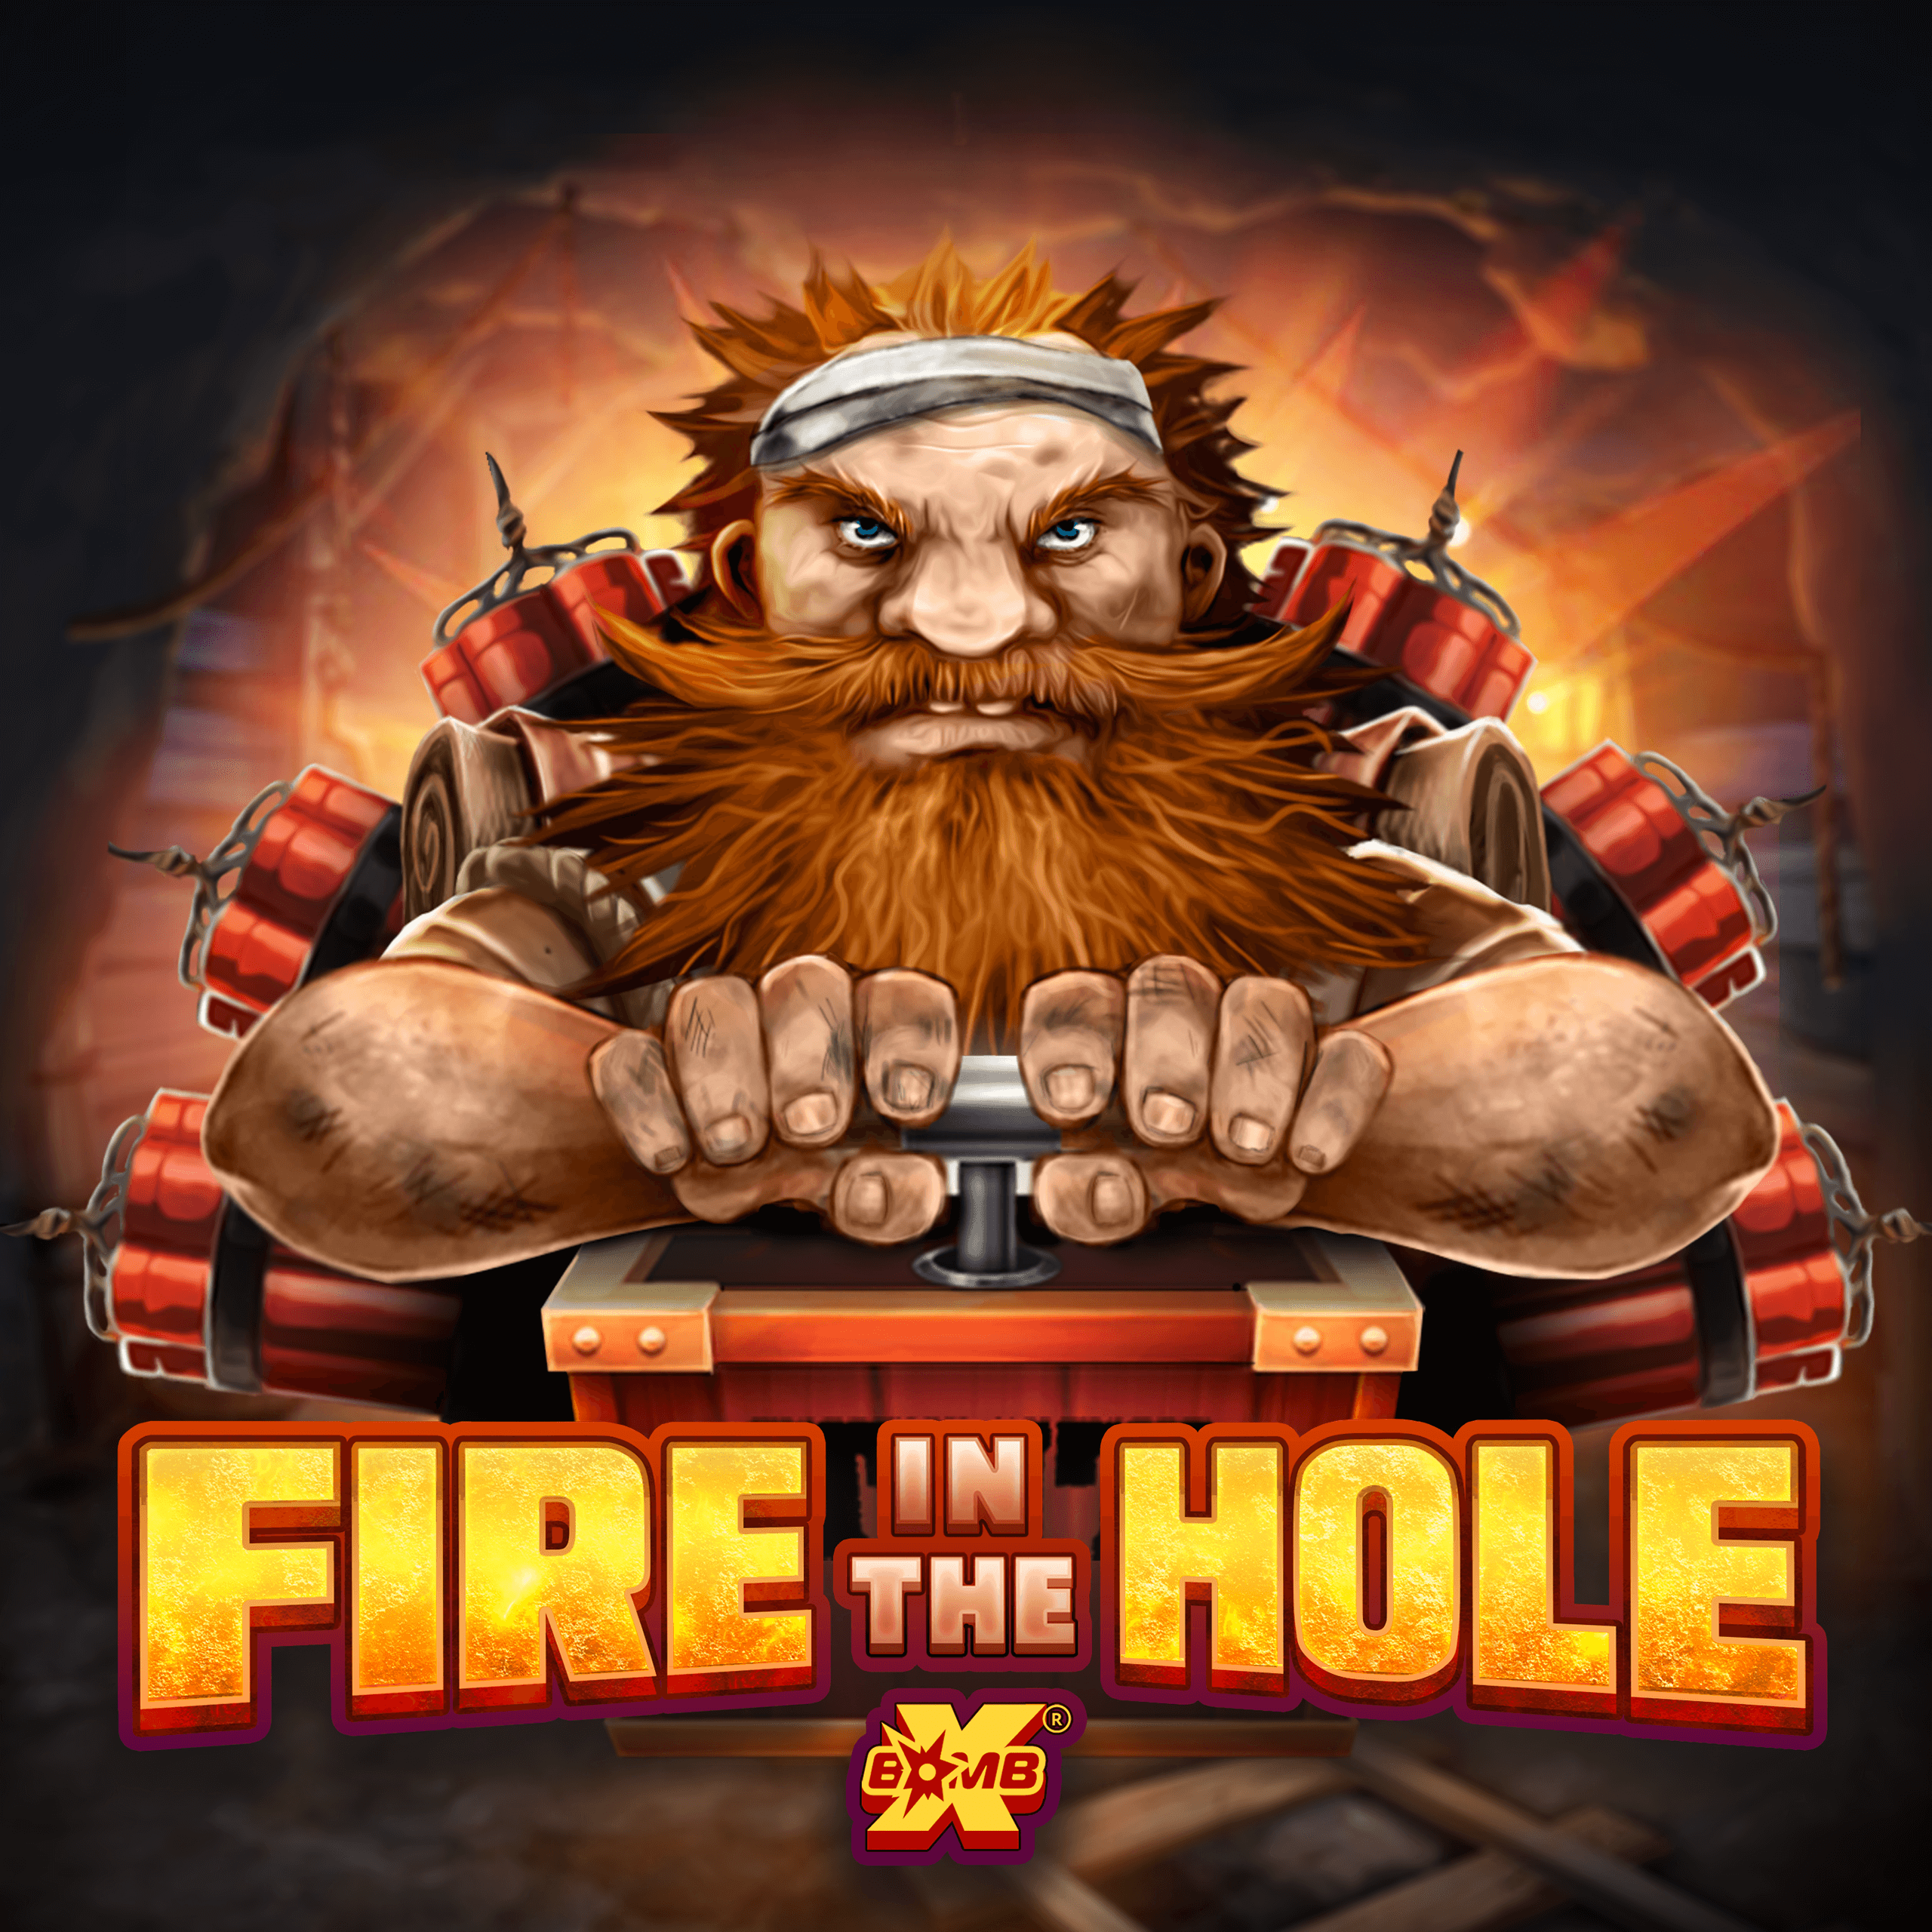 Fire on the hole. Fire in the hole XBOMB. Слот Warrior Graveyard. Fire in the hole слот. Fire in the Hall. Игра.